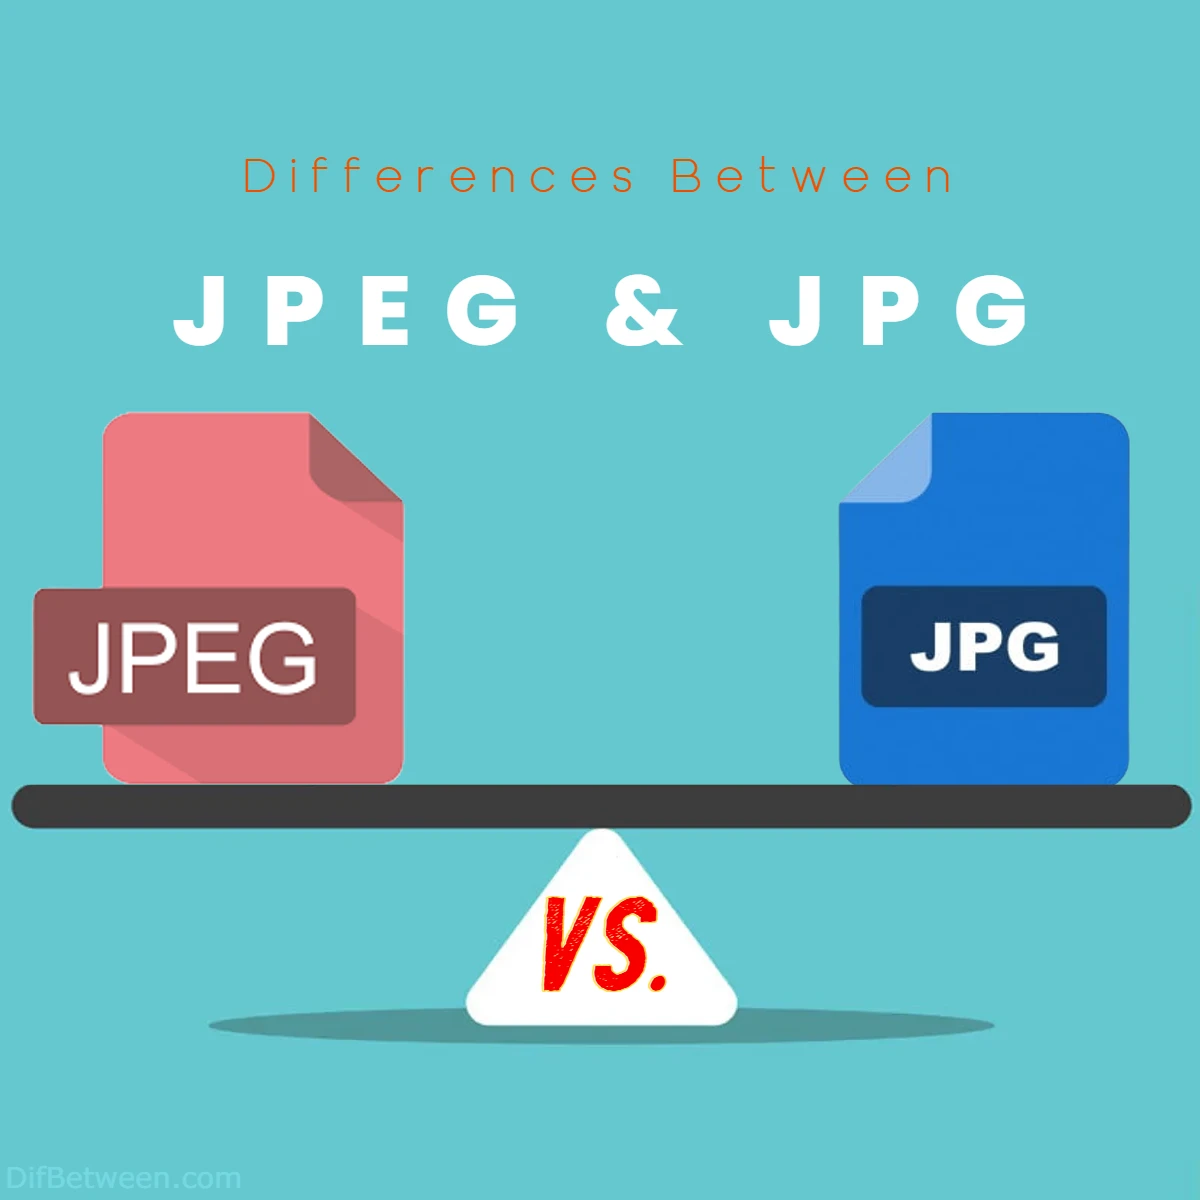 Differences Between JPEG and JPG Formats